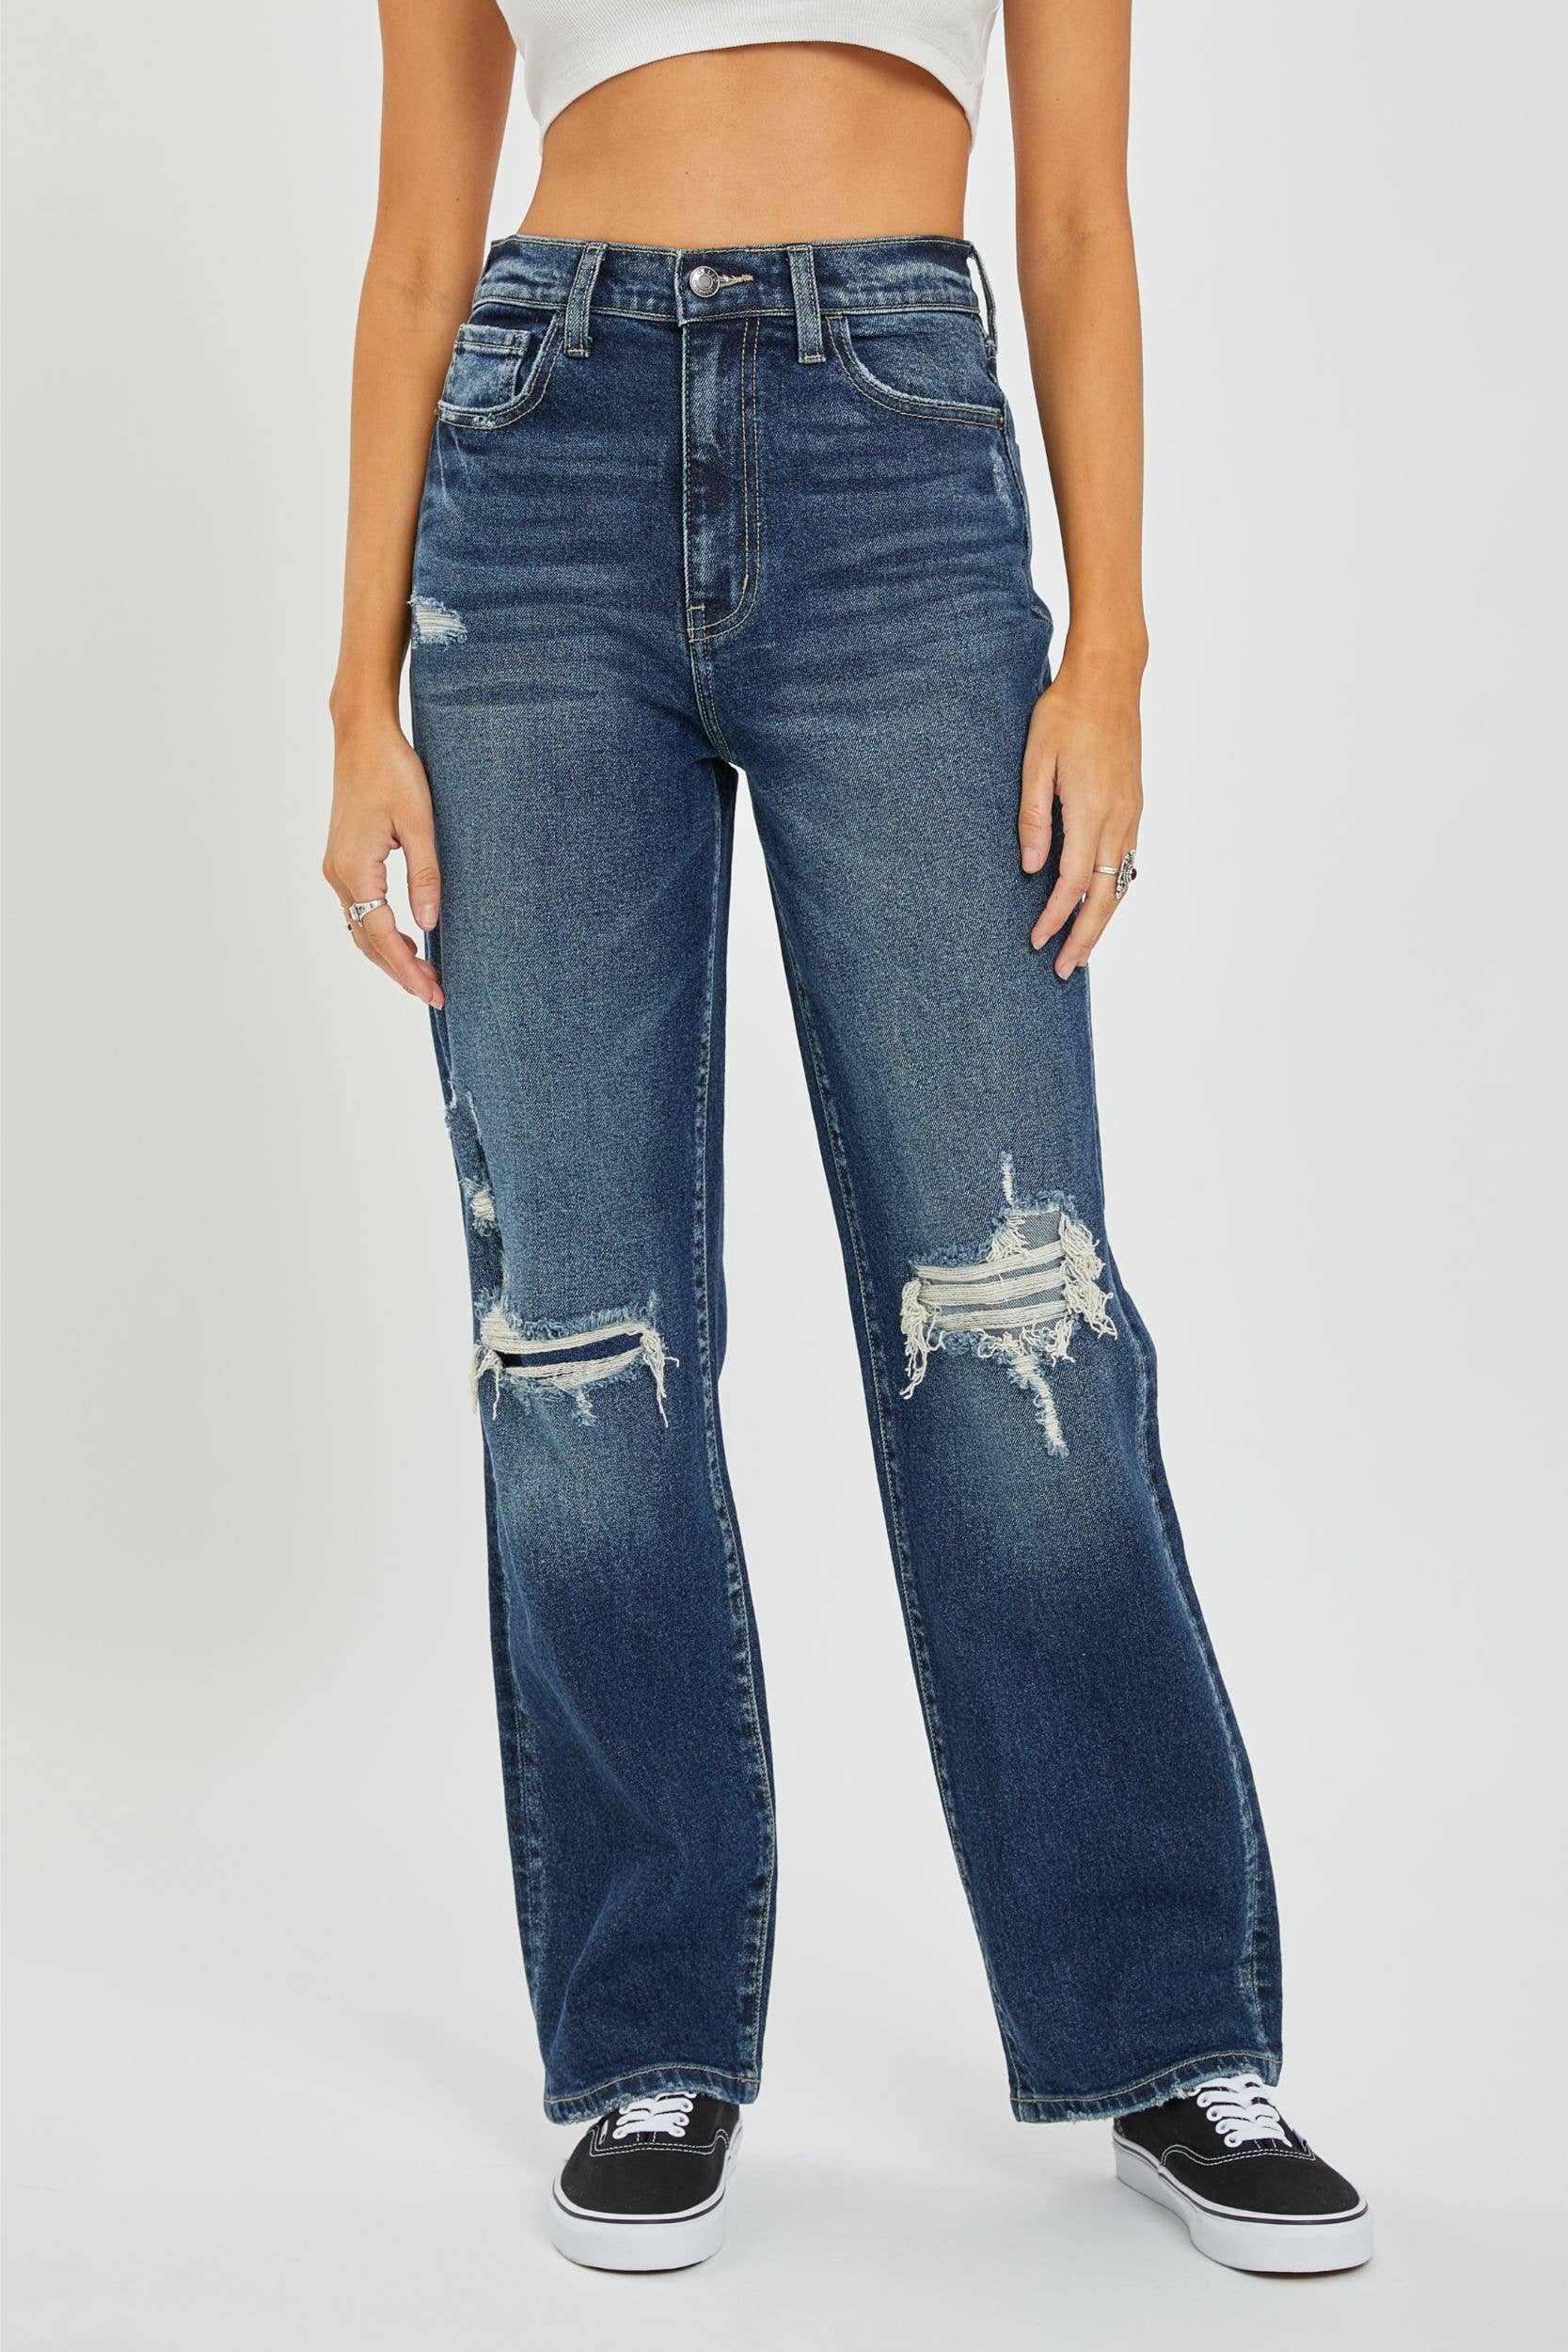 cello pull on flare jegging cargo pocket jeans in dark wash